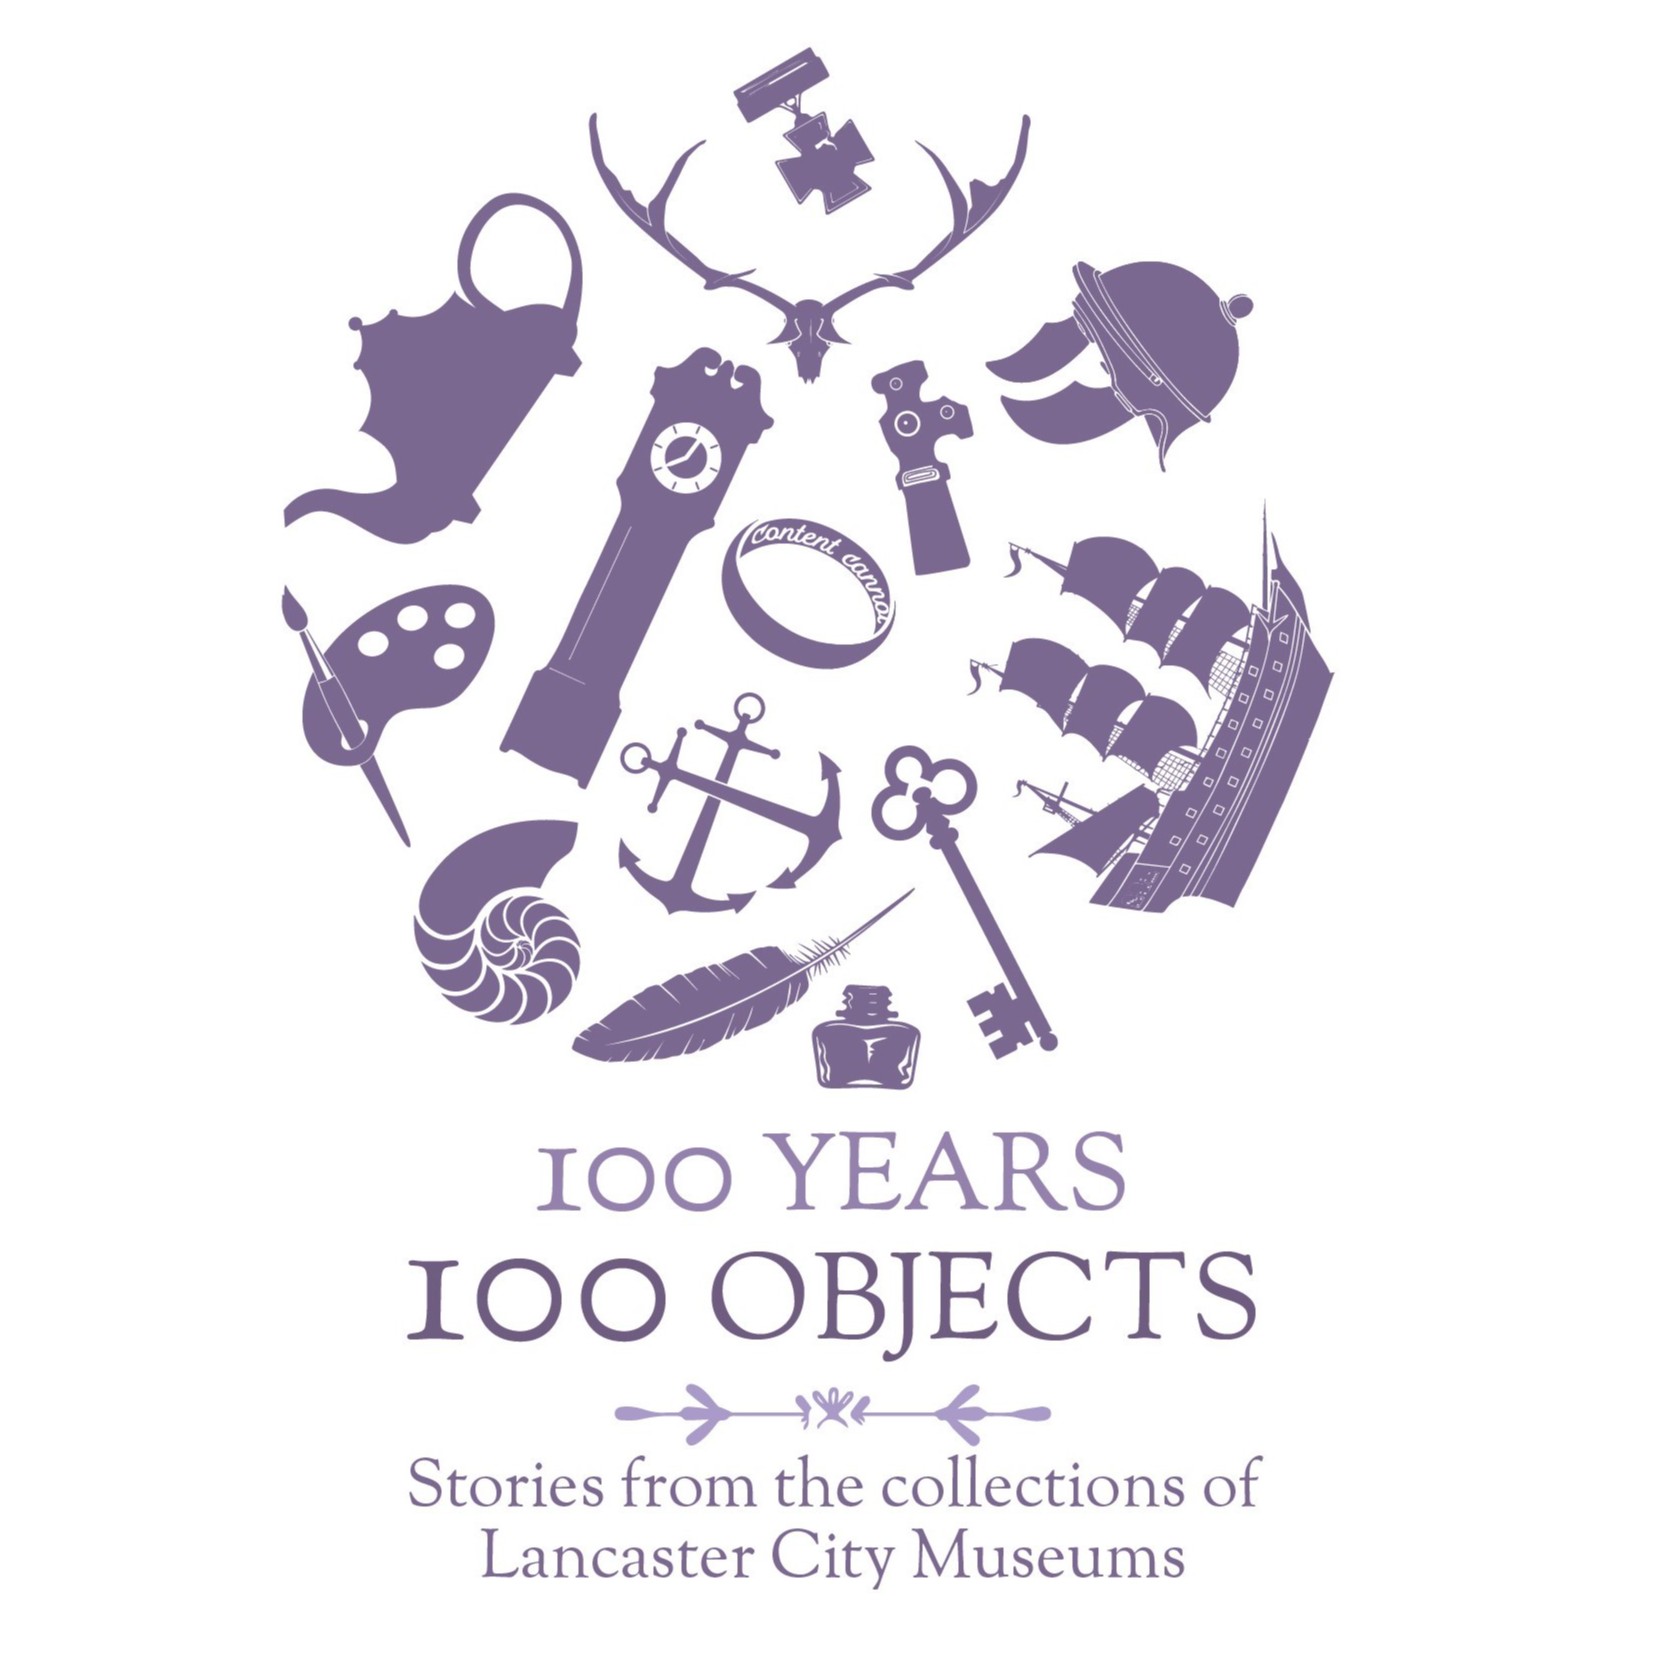 100 Years, 100 Objects: Stories from the Collections of Lancaster City Museums